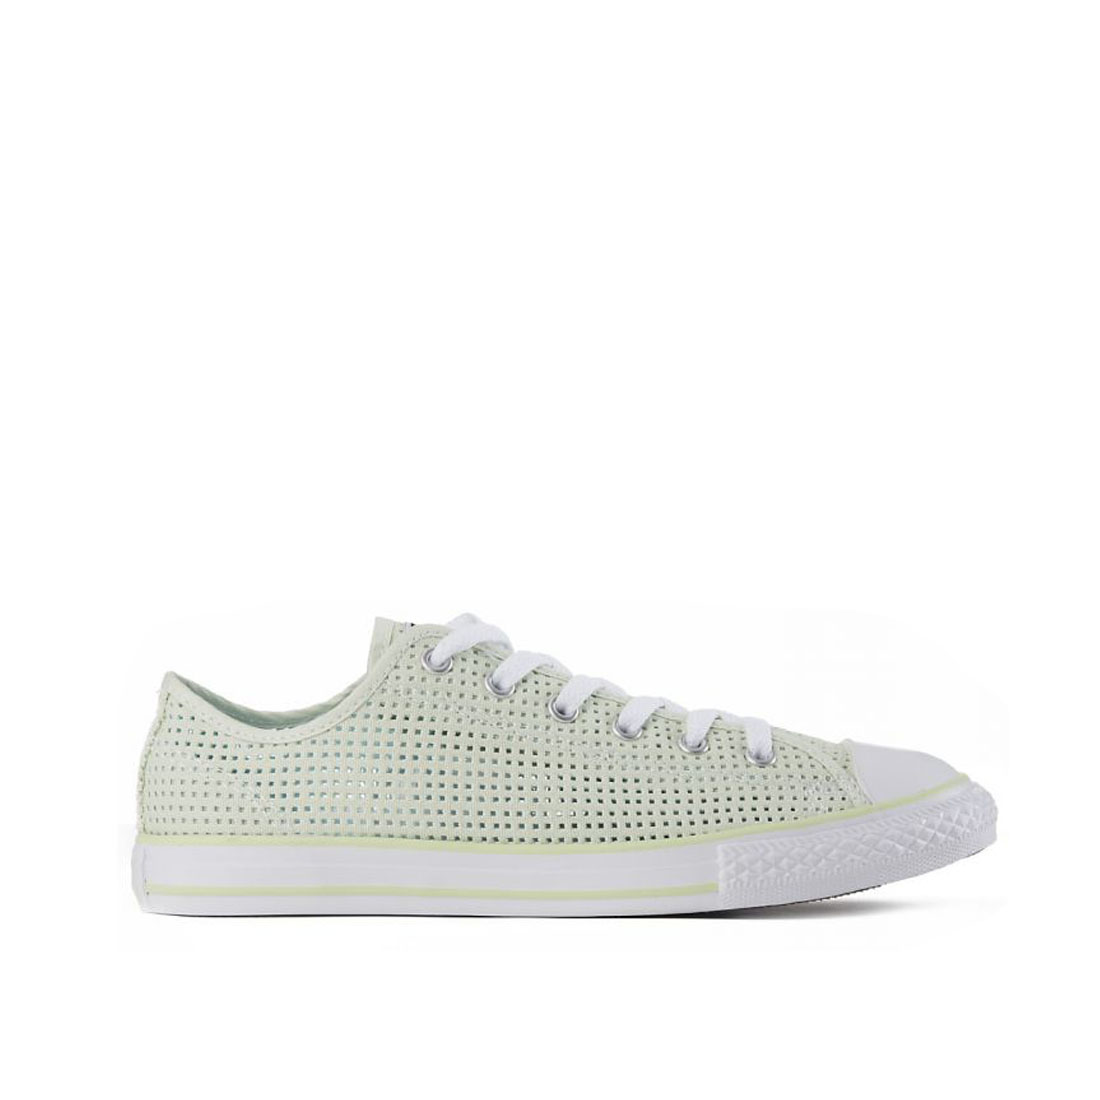 Converse Chuck Taylor All Star Perforated Unisex/Adult shoe size 5  Casual 651808F Green - image 1 of 1